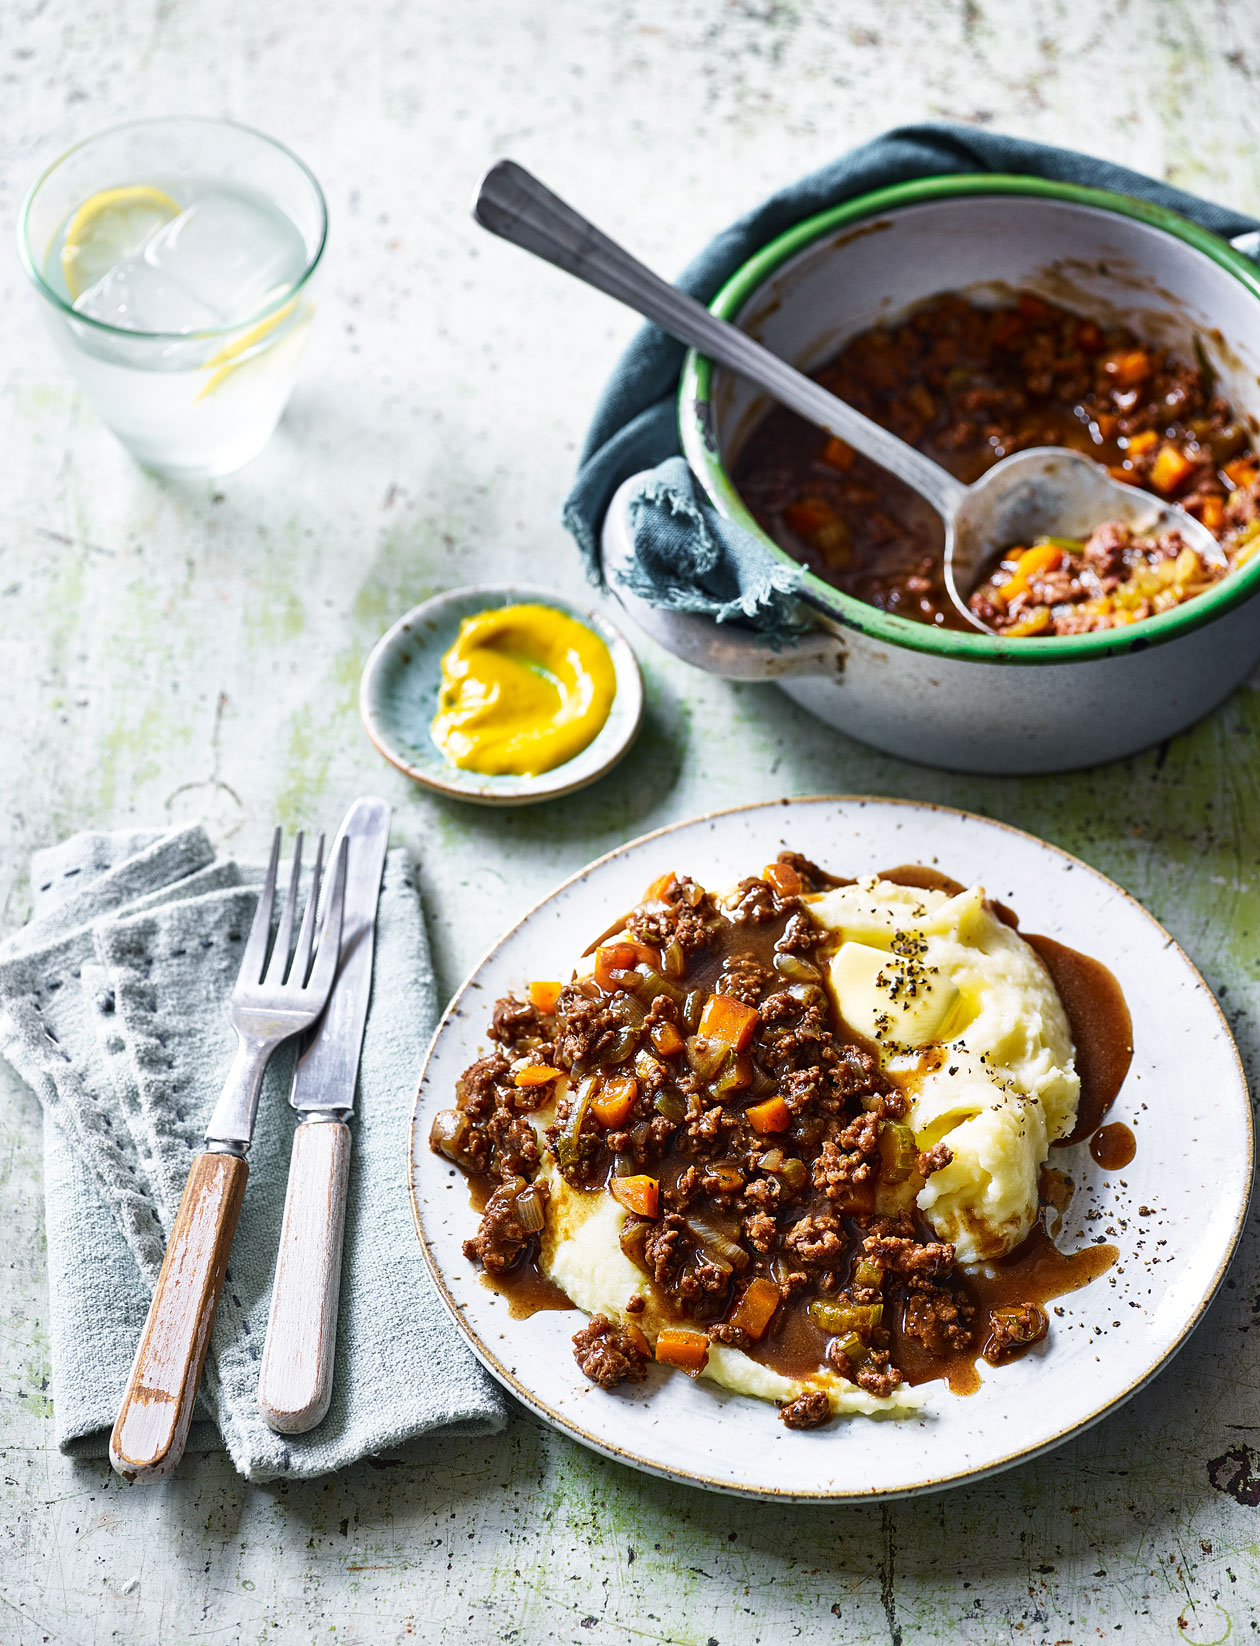 How to Make Mince Recipes Uk